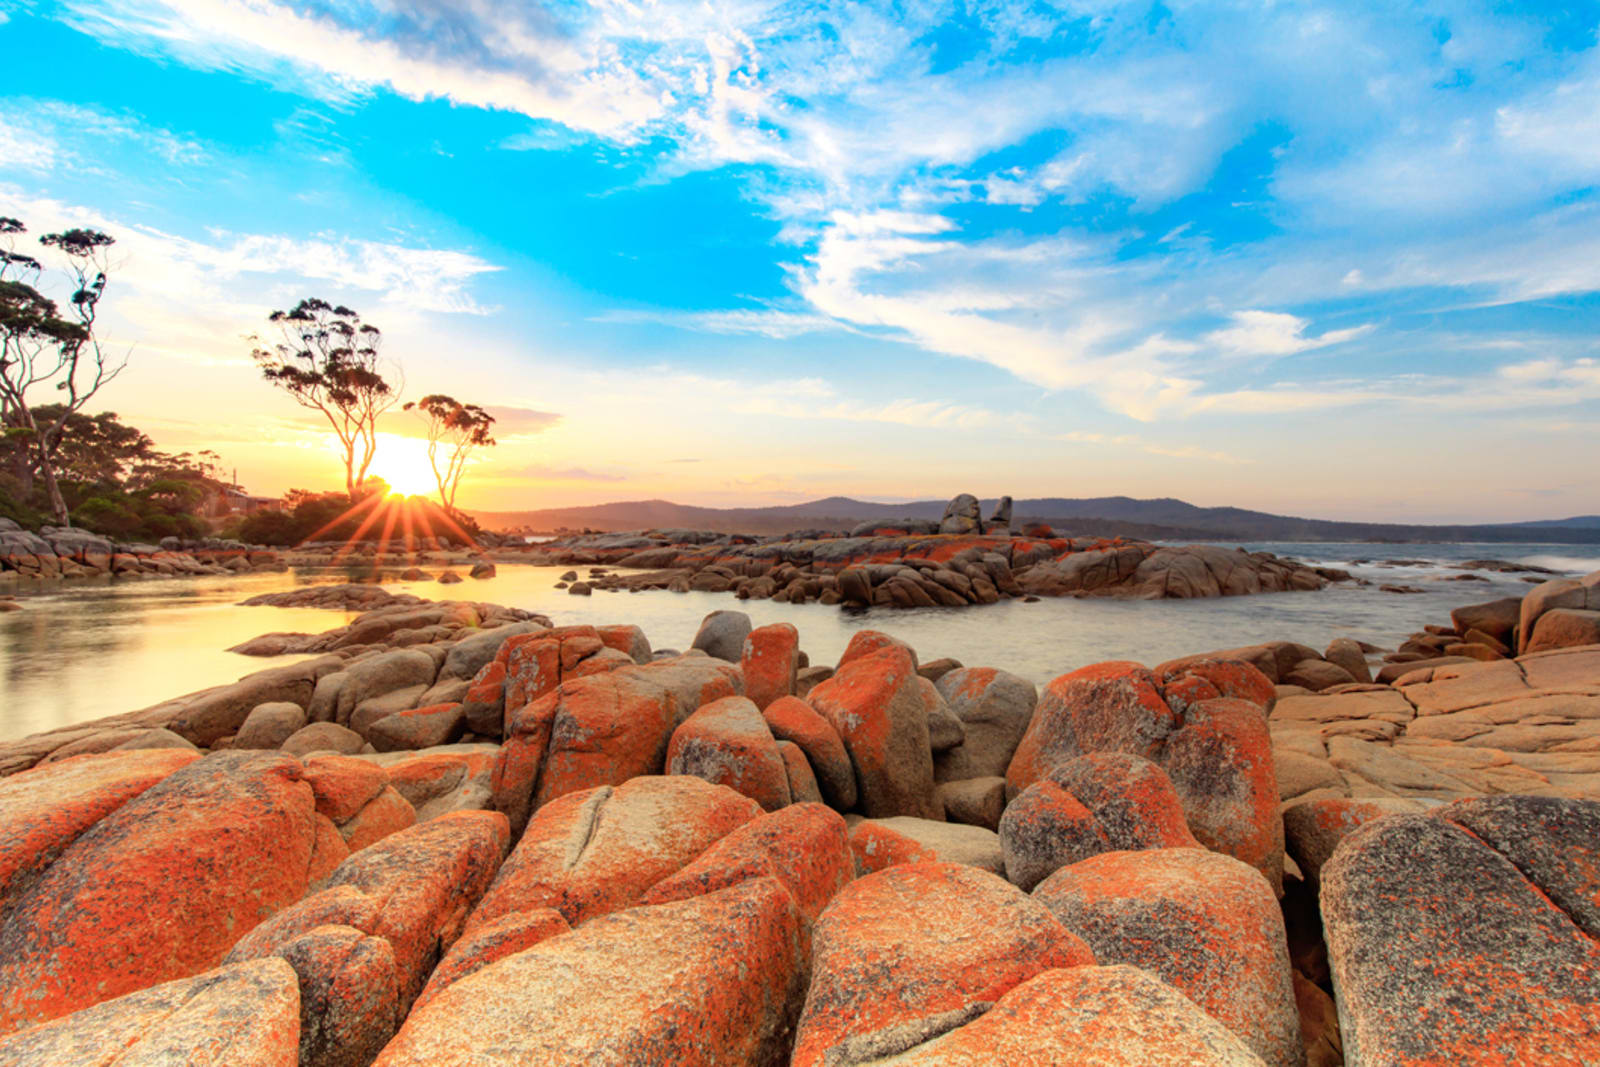 The Bay of Fires is one of the attractions on the Great Eastern Drive in Tasmania